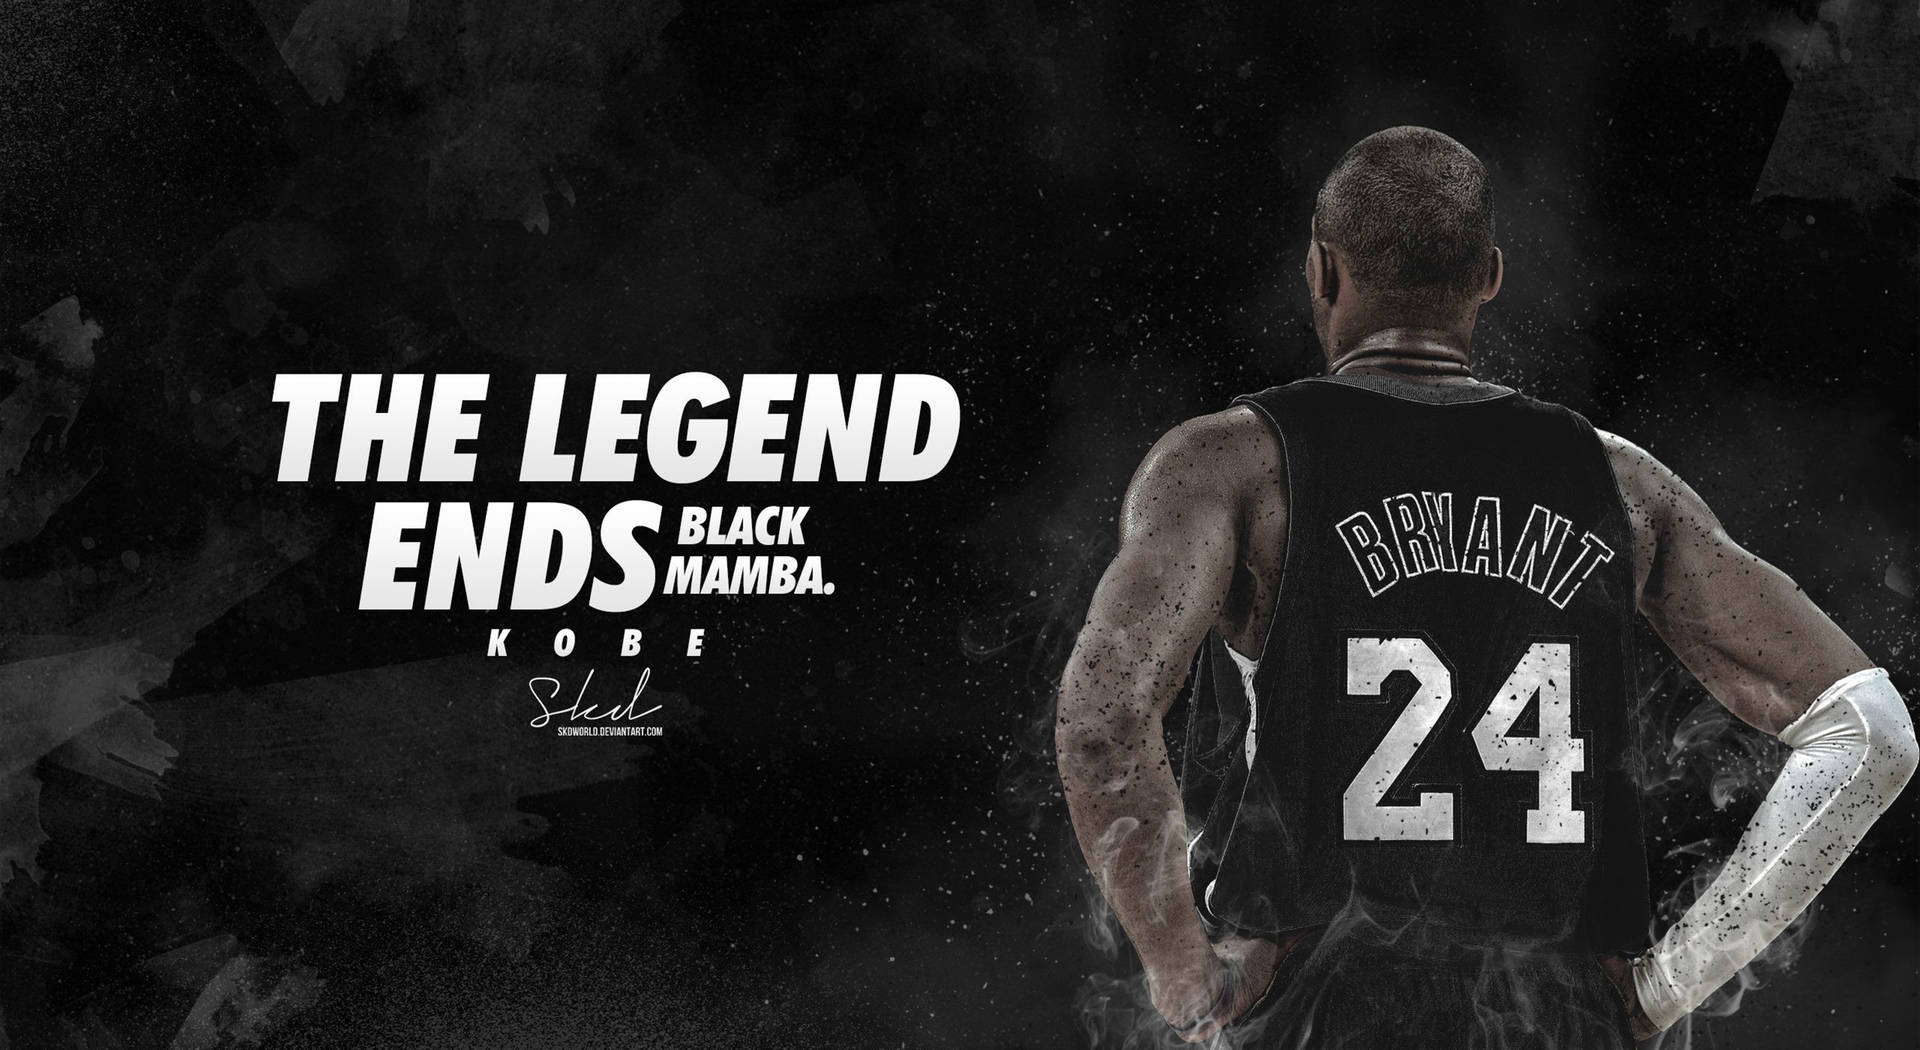 Kobe Bryant The End of a Legend Wallpaper  Basketball Wallpapers at